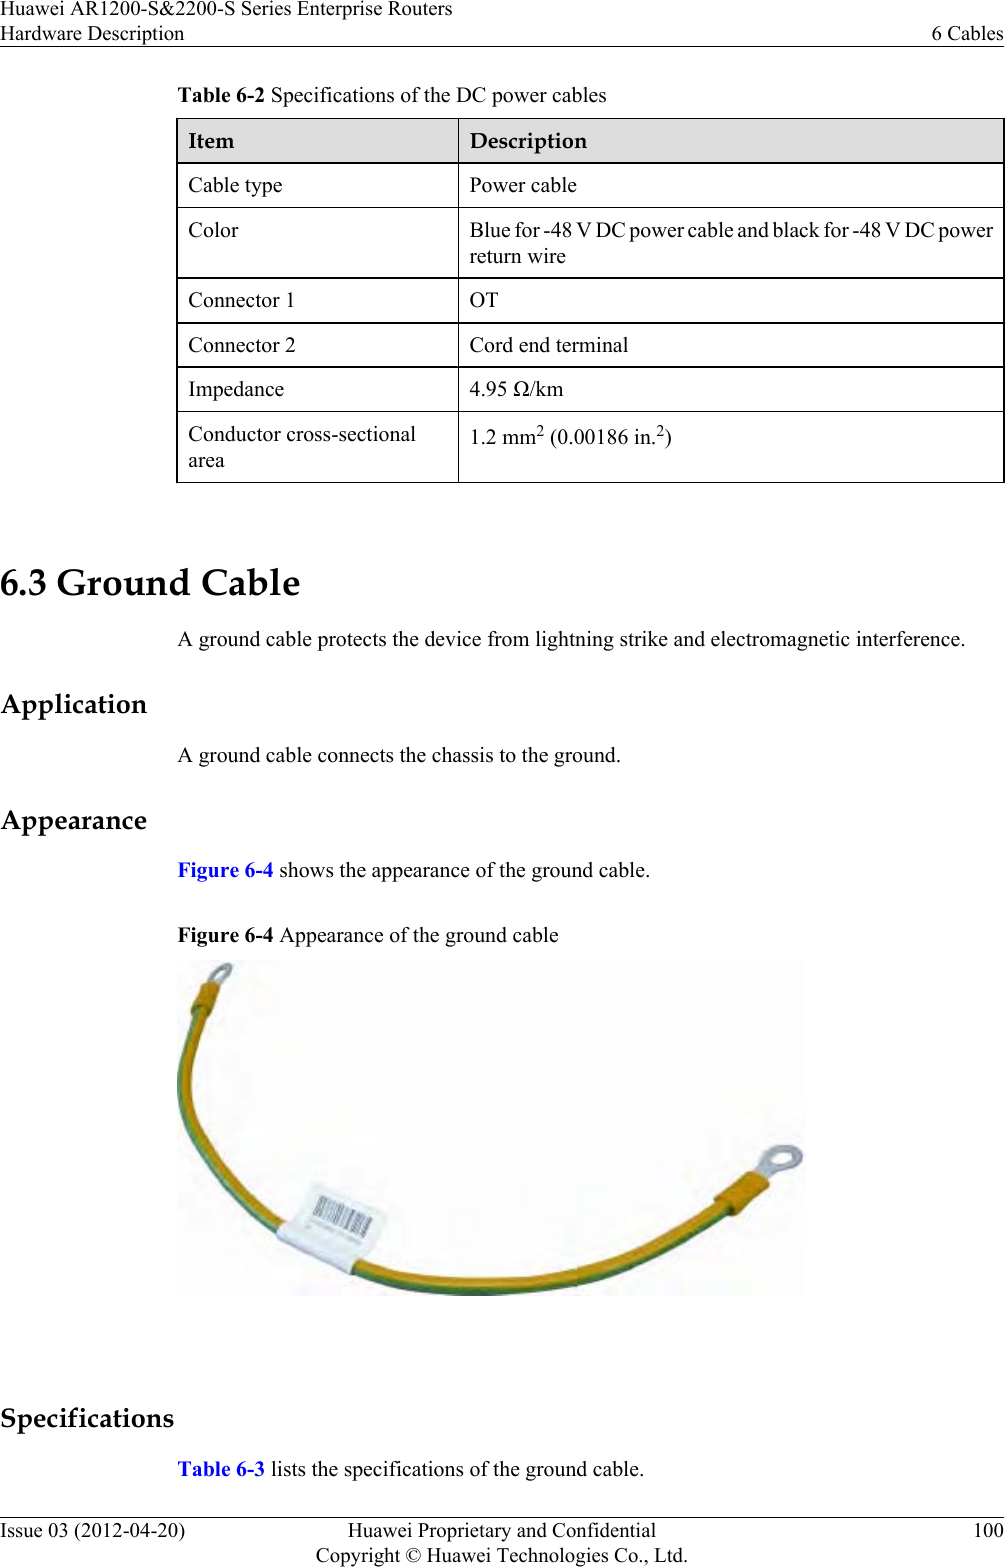 Table 6-2 Specifications of the DC power cablesItem DescriptionCable type Power cableColor Blue for -48 V DC power cable and black for -48 V DC powerreturn wireConnector 1 OTConnector 2 Cord end terminalImpedance 4.95 Ω/kmConductor cross-sectionalarea1.2 mm2 (0.00186 in.2) 6.3 Ground CableA ground cable protects the device from lightning strike and electromagnetic interference.ApplicationA ground cable connects the chassis to the ground.AppearanceFigure 6-4 shows the appearance of the ground cable.Figure 6-4 Appearance of the ground cable SpecificationsTable 6-3 lists the specifications of the ground cable.Huawei AR1200-S&amp;2200-S Series Enterprise RoutersHardware Description 6 CablesIssue 03 (2012-04-20) Huawei Proprietary and ConfidentialCopyright © Huawei Technologies Co., Ltd.100